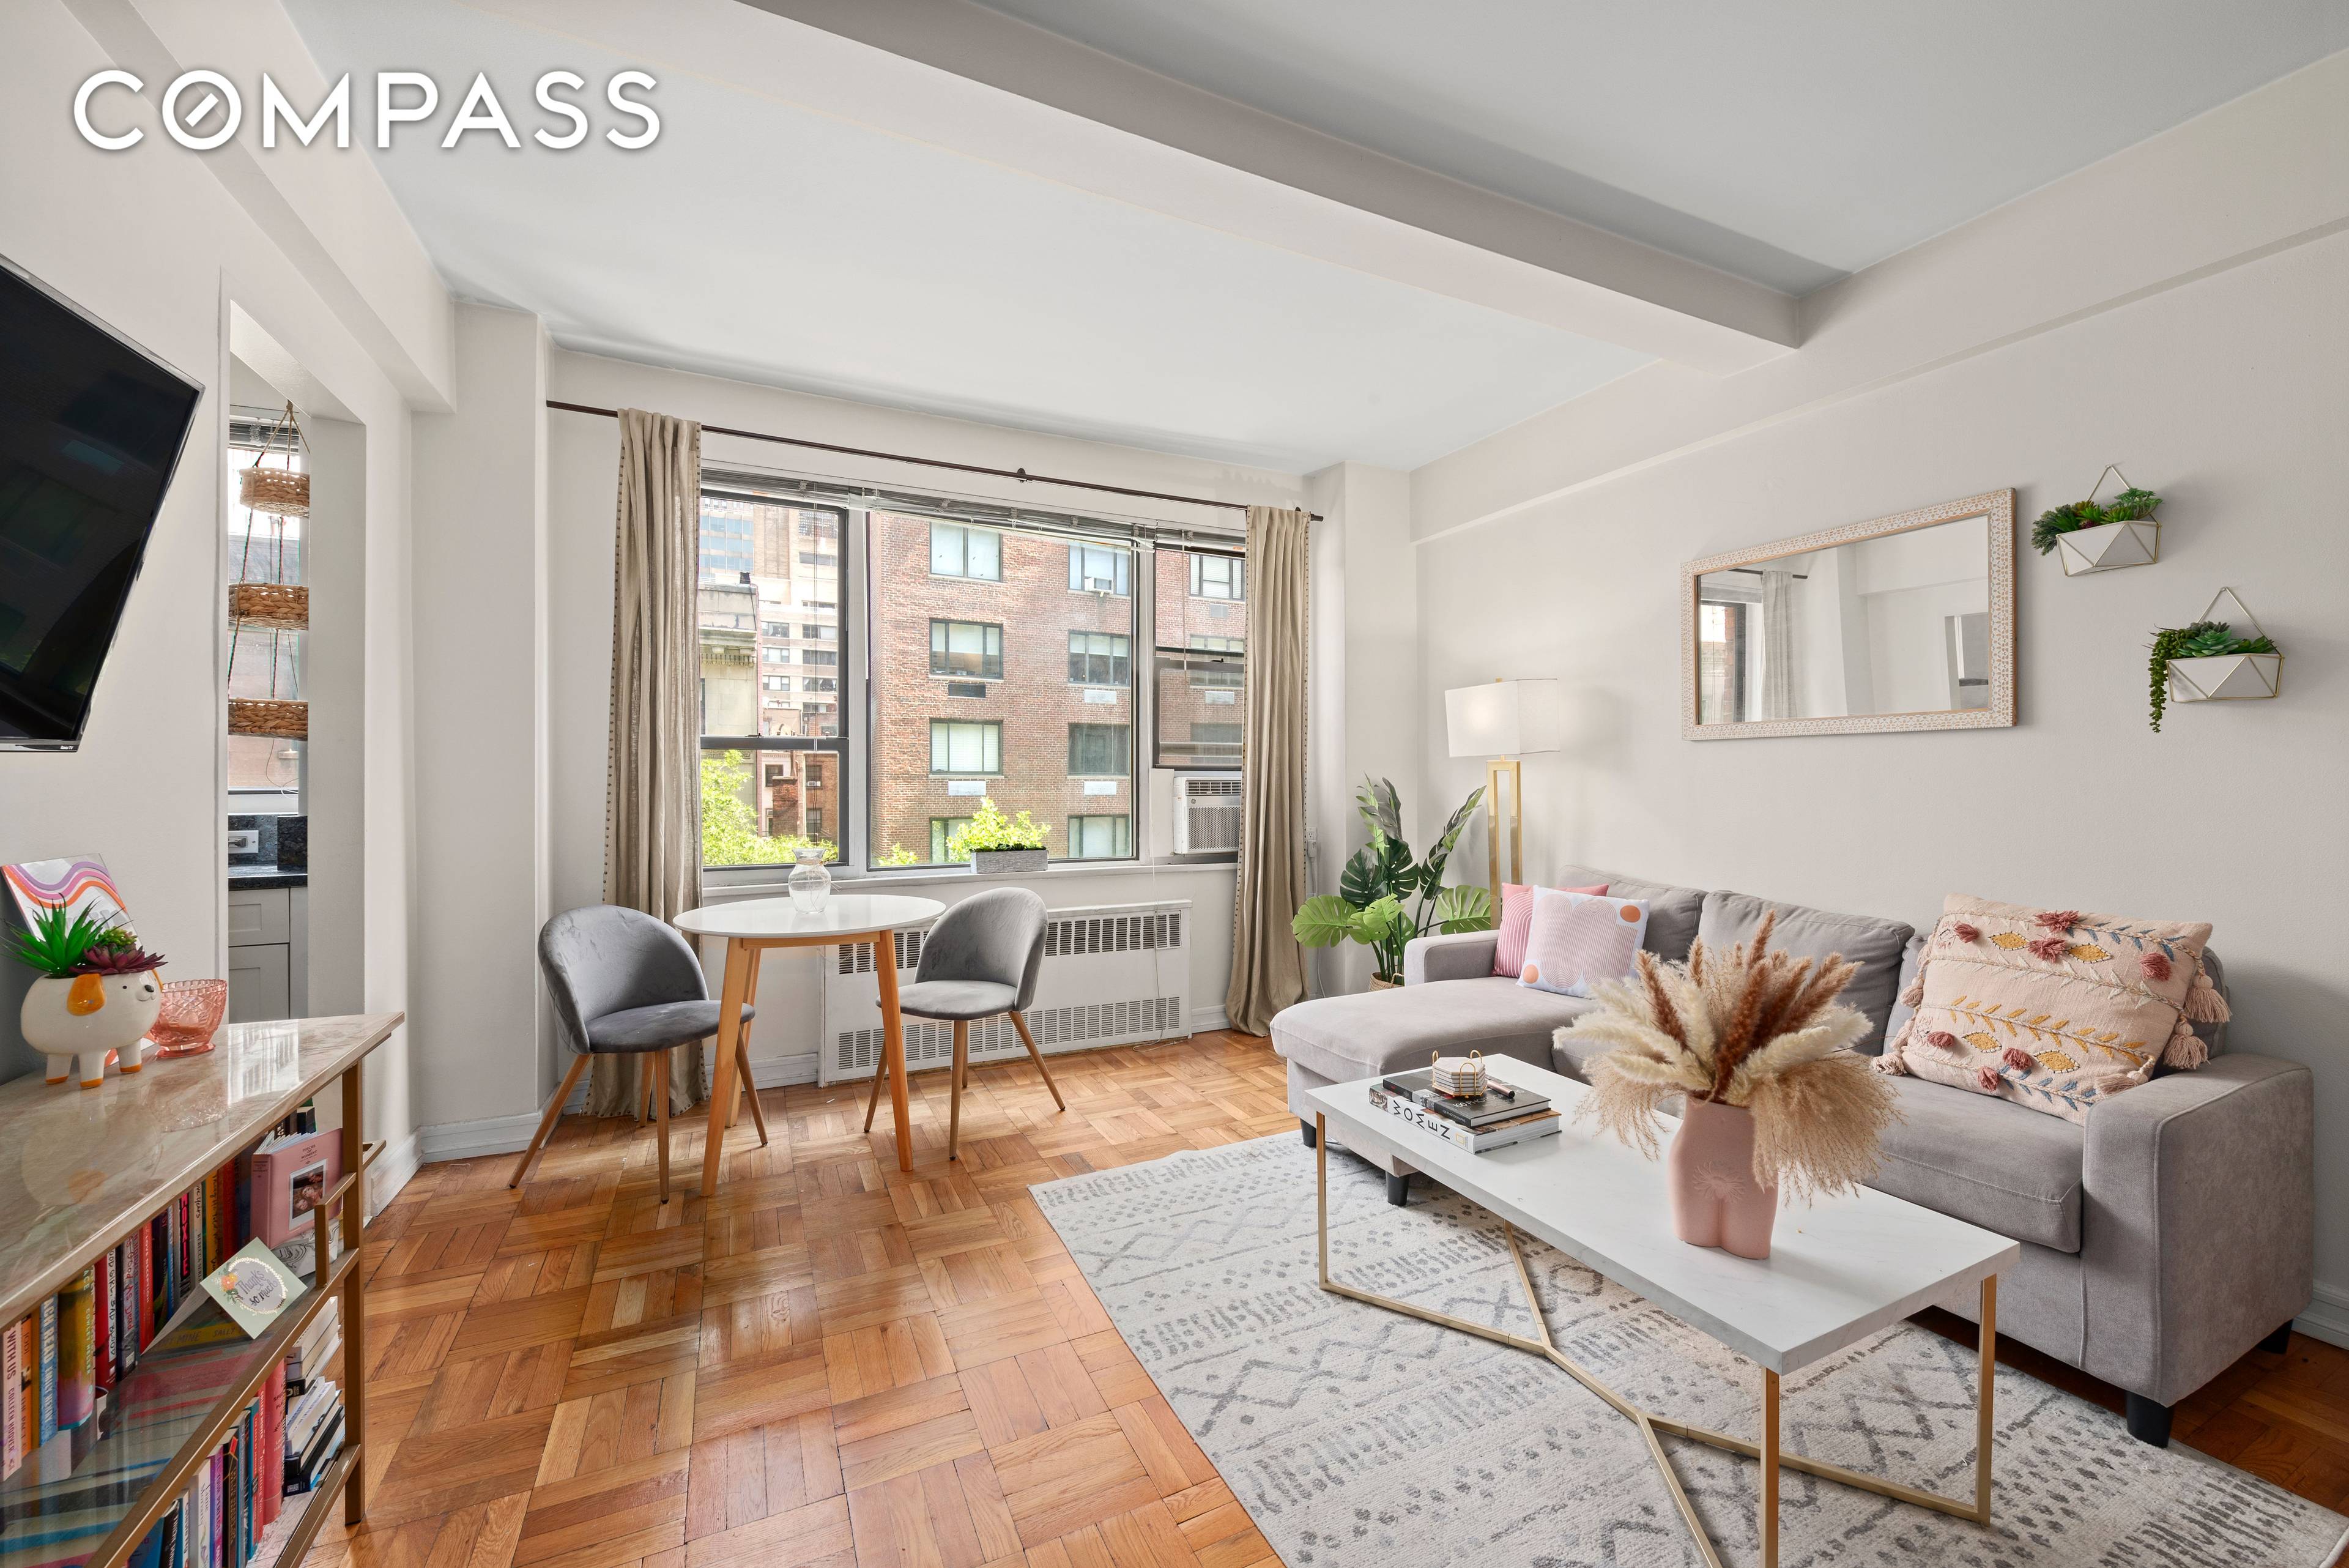 Condo Investor friendly 24 hour doorman __________________________________ This delightful studio apartment is situated within a charming condominium building just a stone's throw away from the historic Morgan Library.